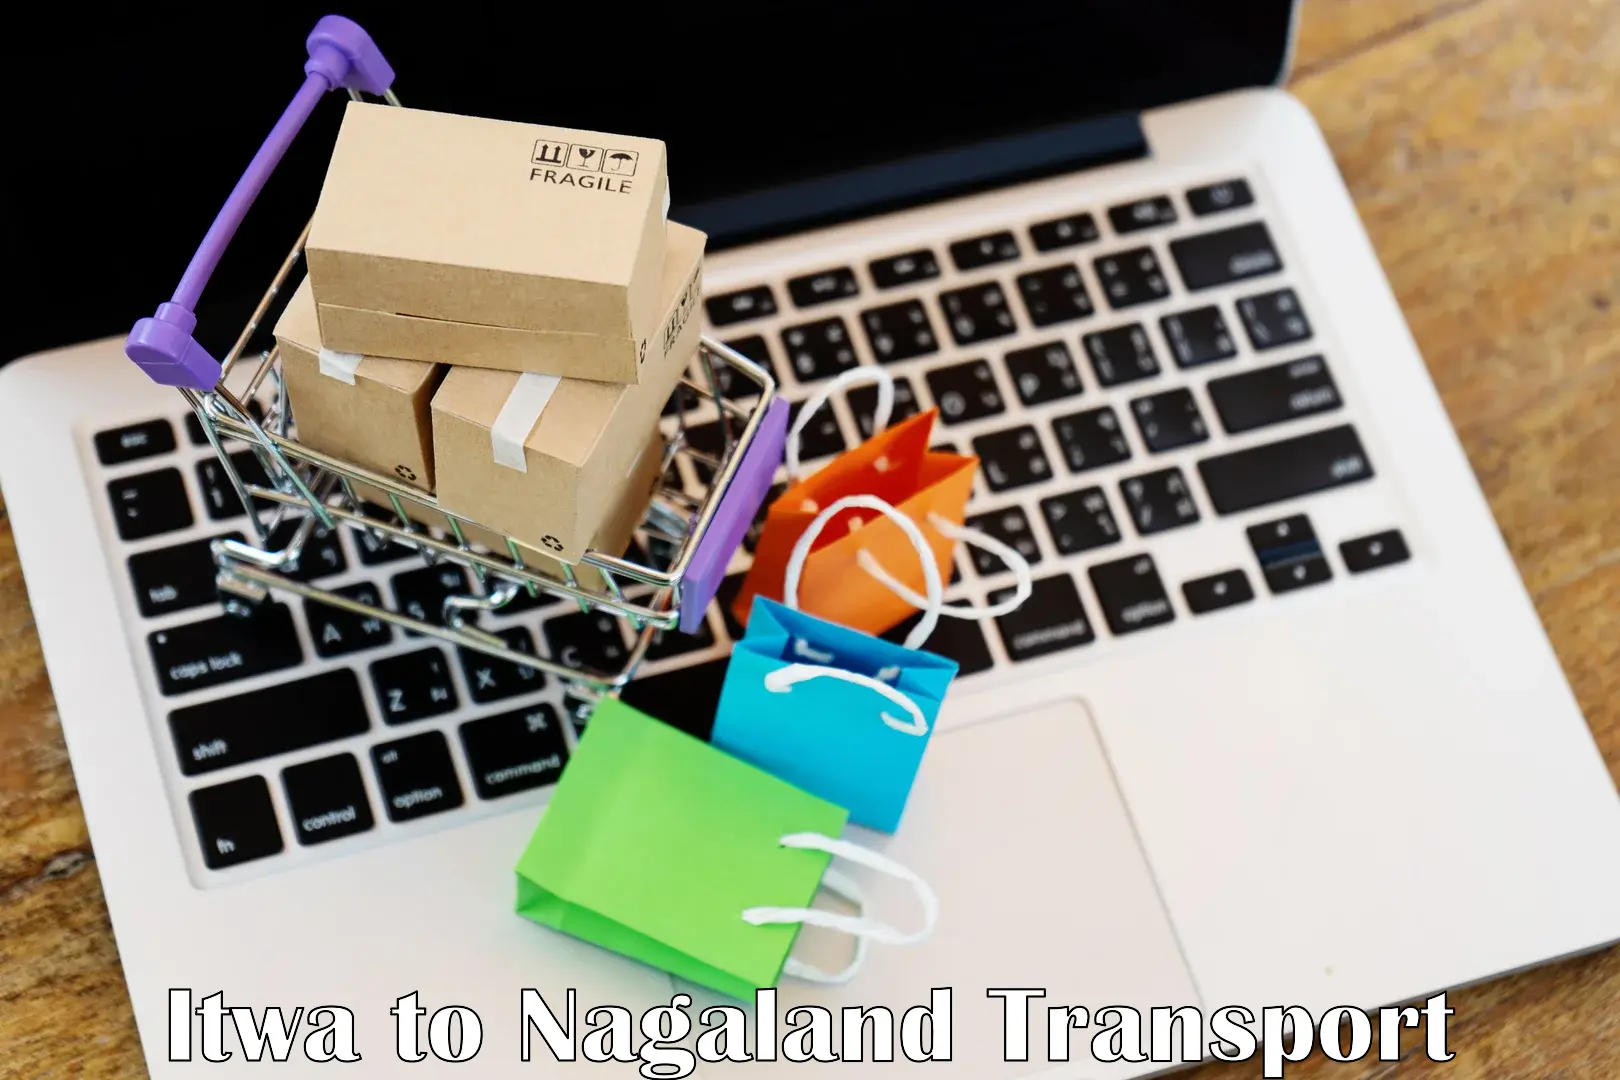 Online transport service Itwa to Nagaland